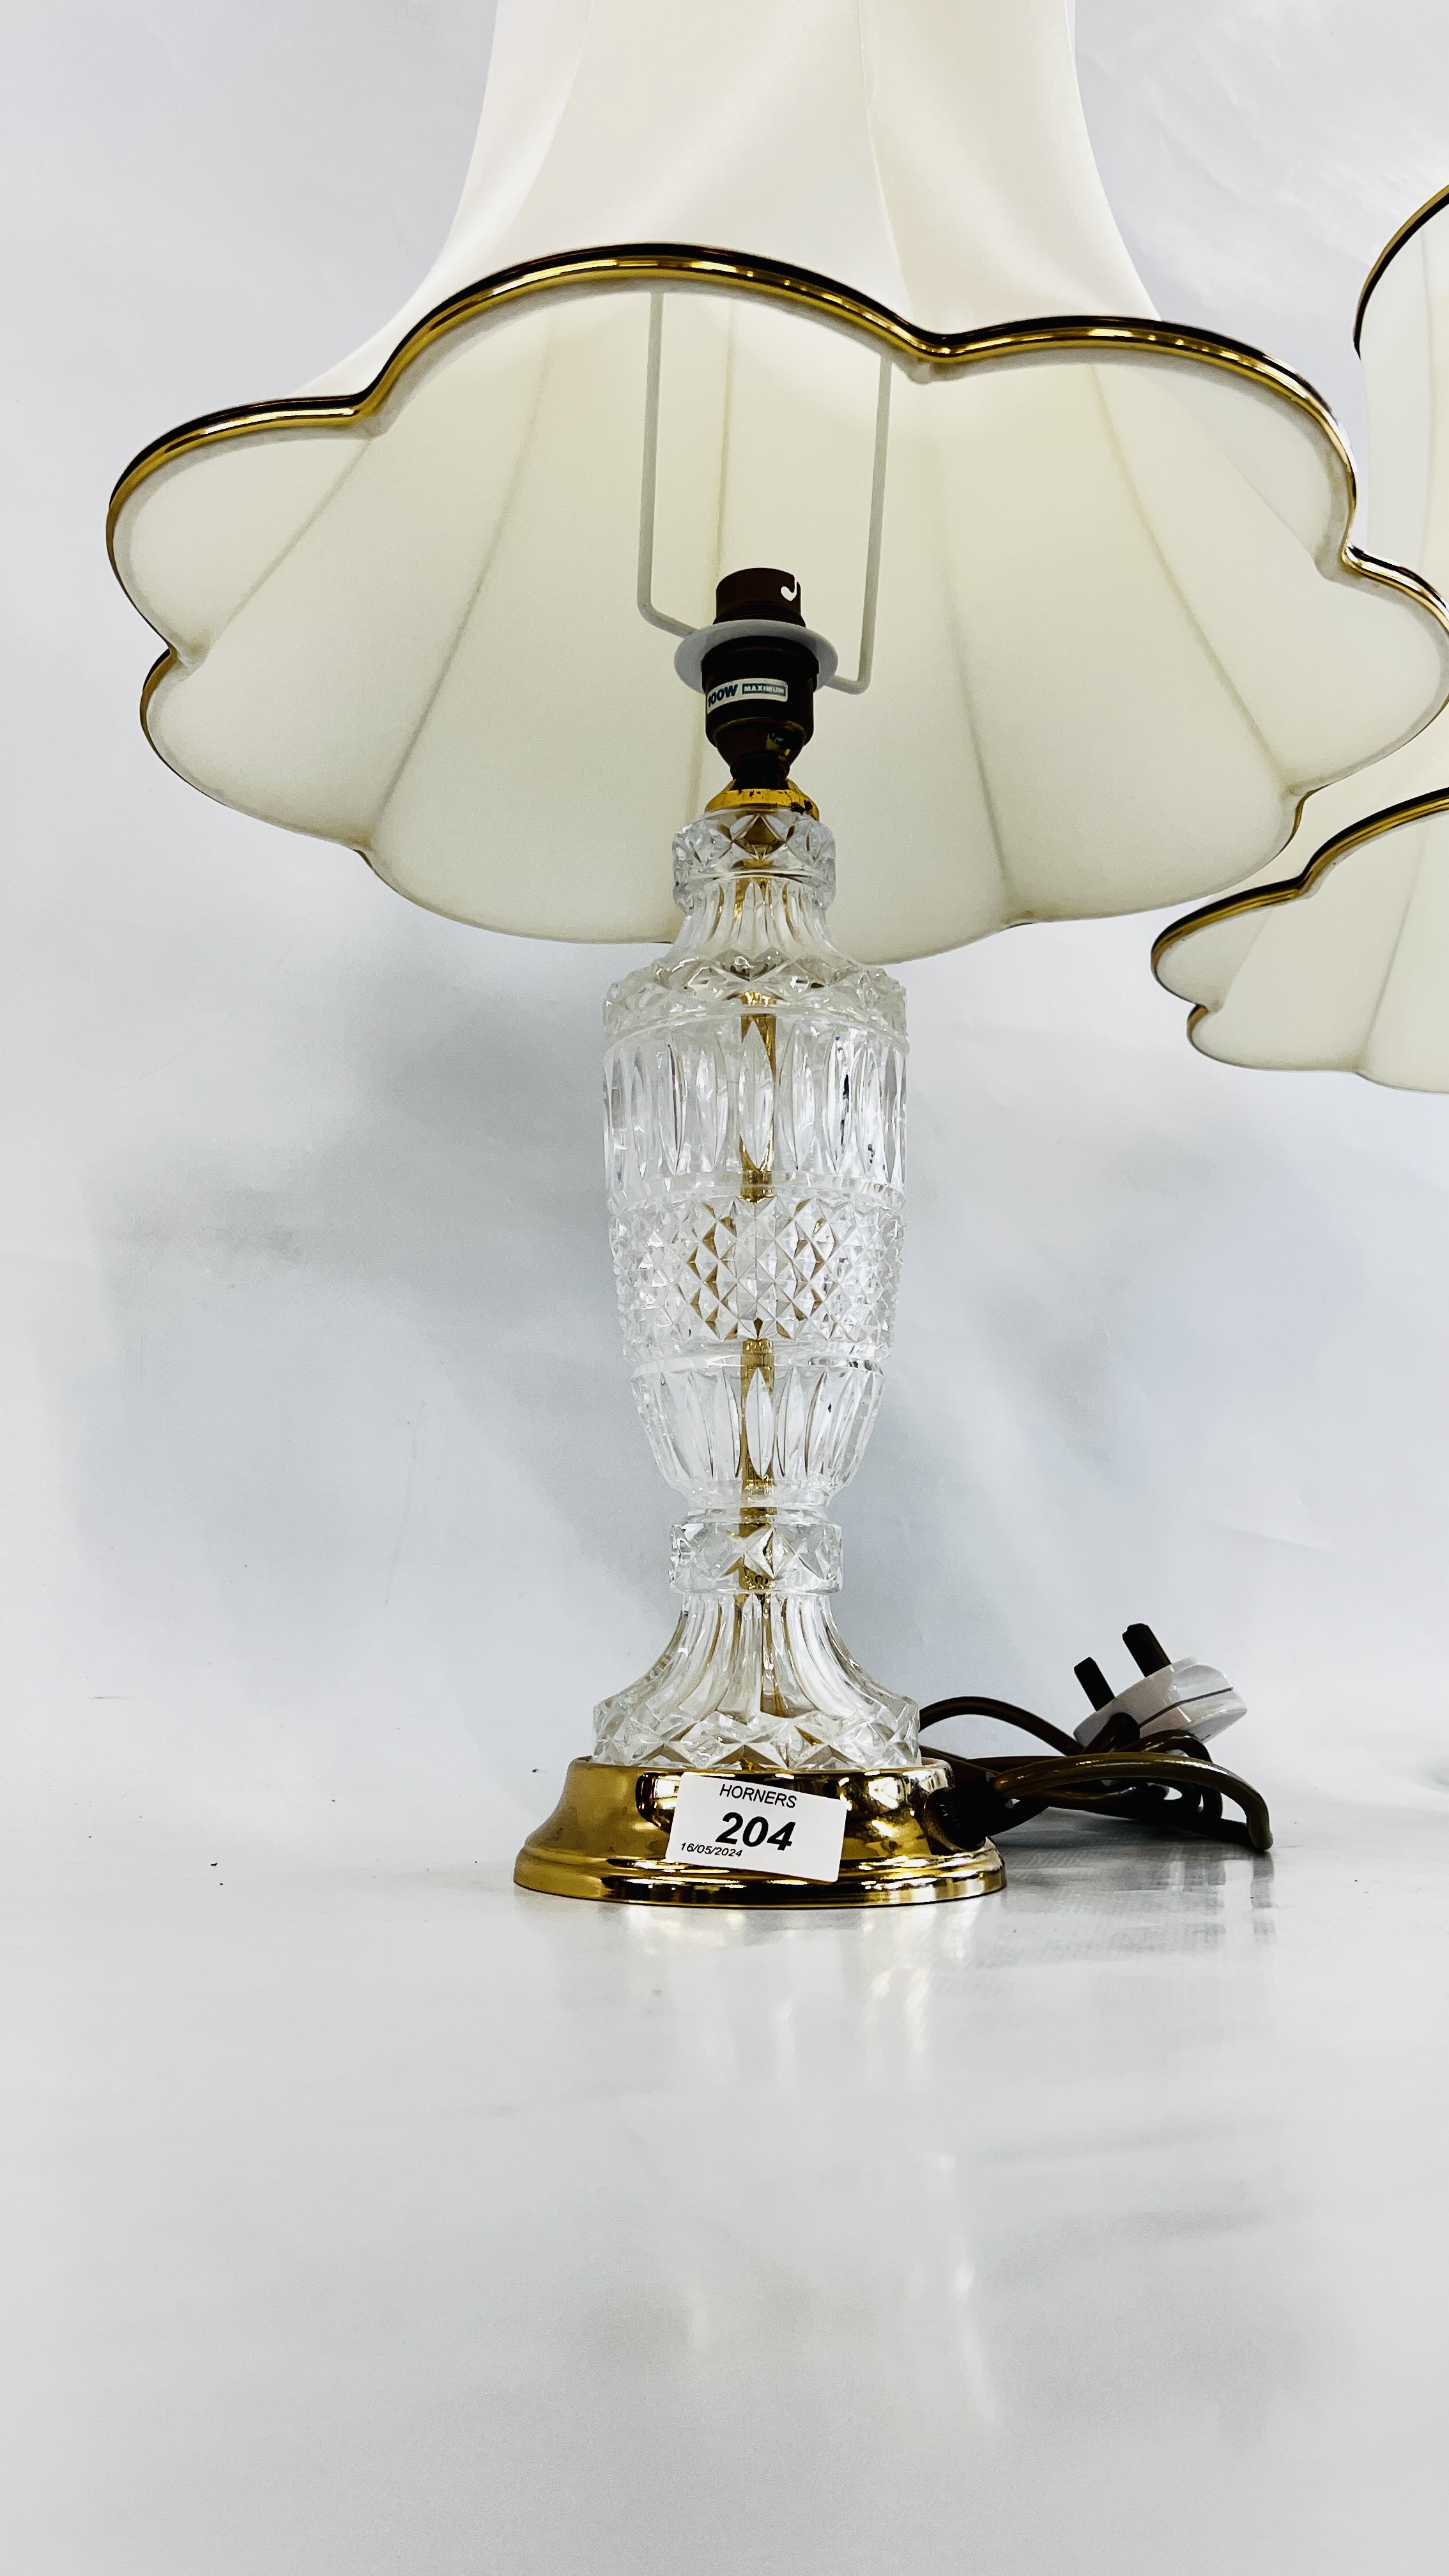 PAIR OF LEAD CRYSTAL TABLE LAMPS WITH CREAM SHADES, OVERALL HEIGHT 58CM - SOLD AS SEEN. - Image 2 of 6